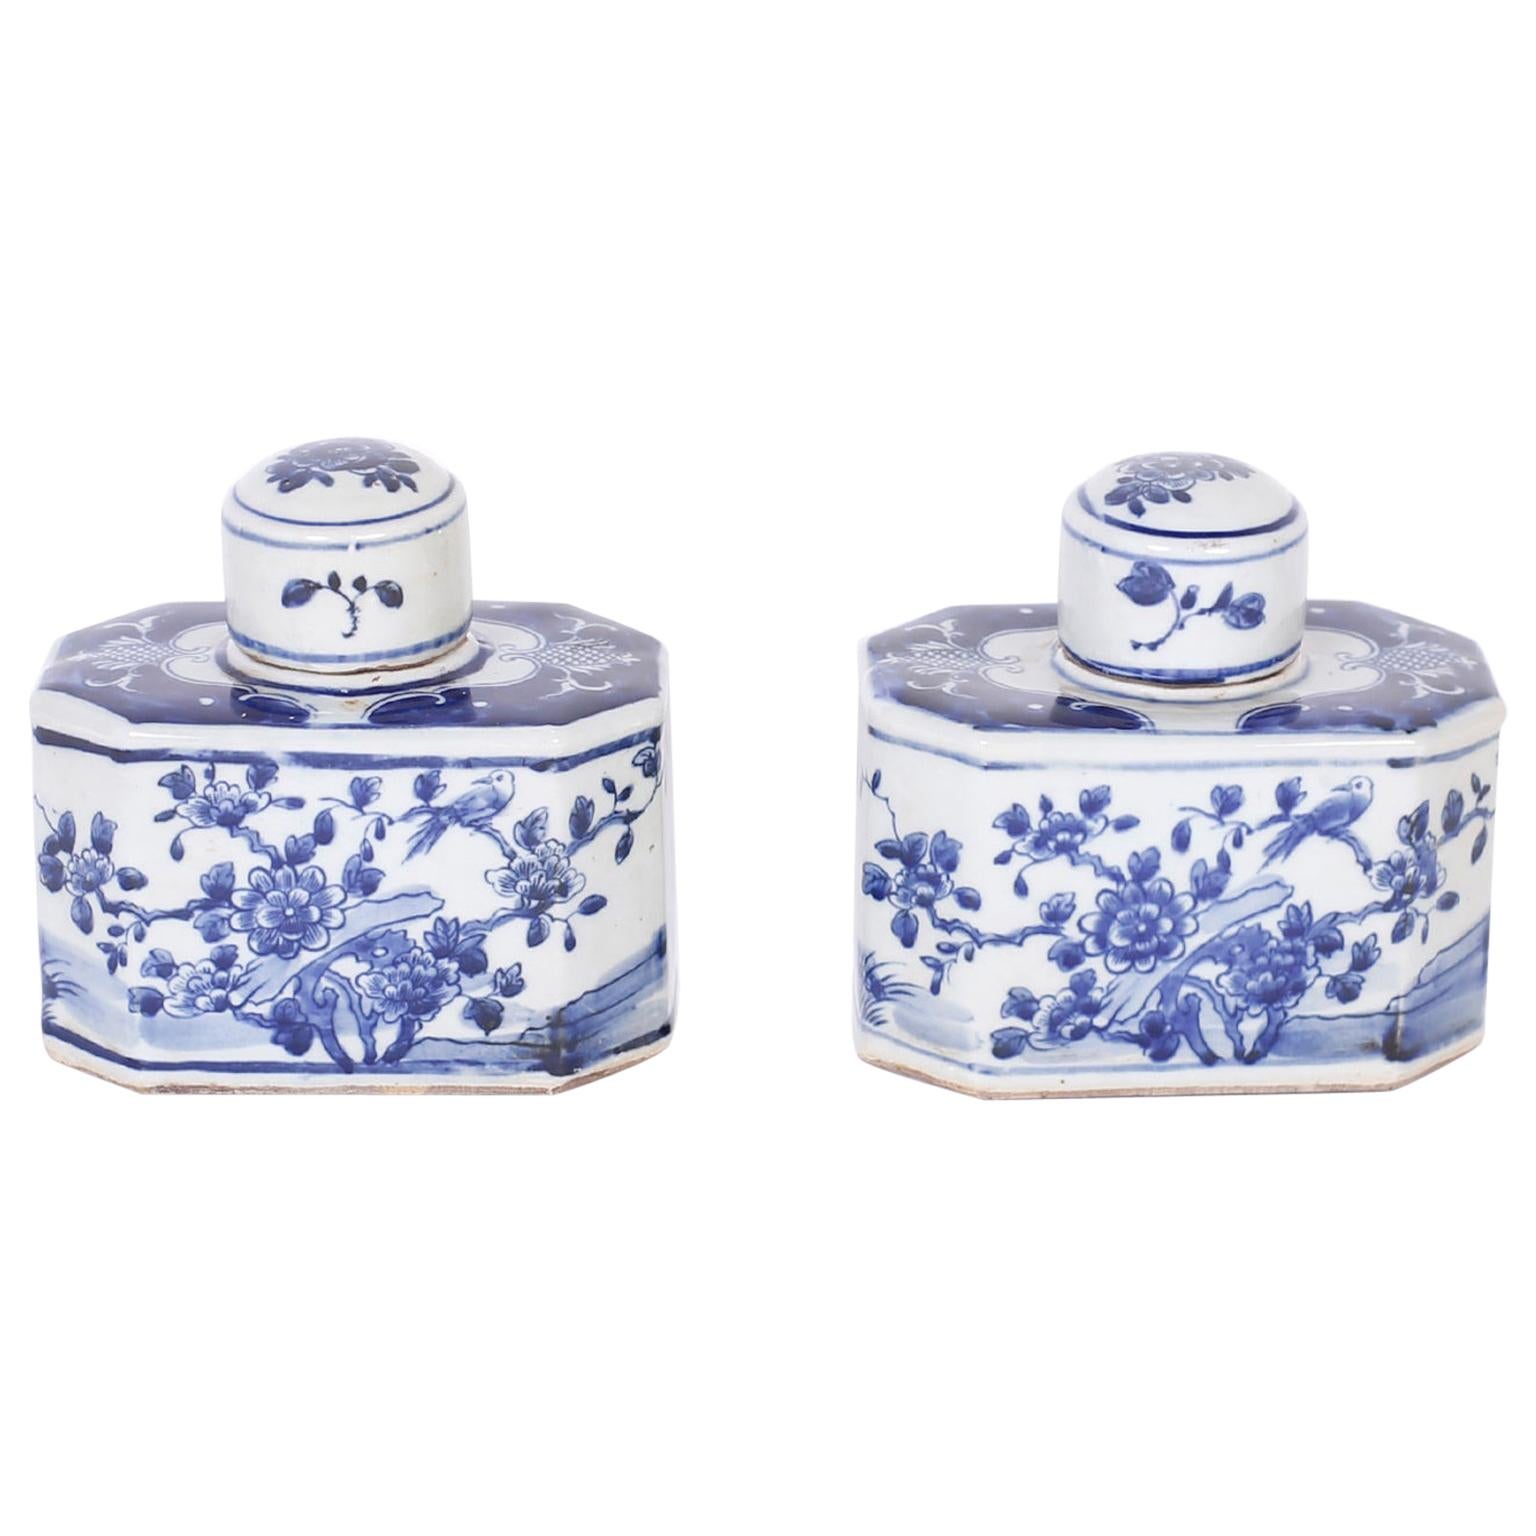 Pair of Blue and White Porcelain Tea Caddies with Flowers For Sale